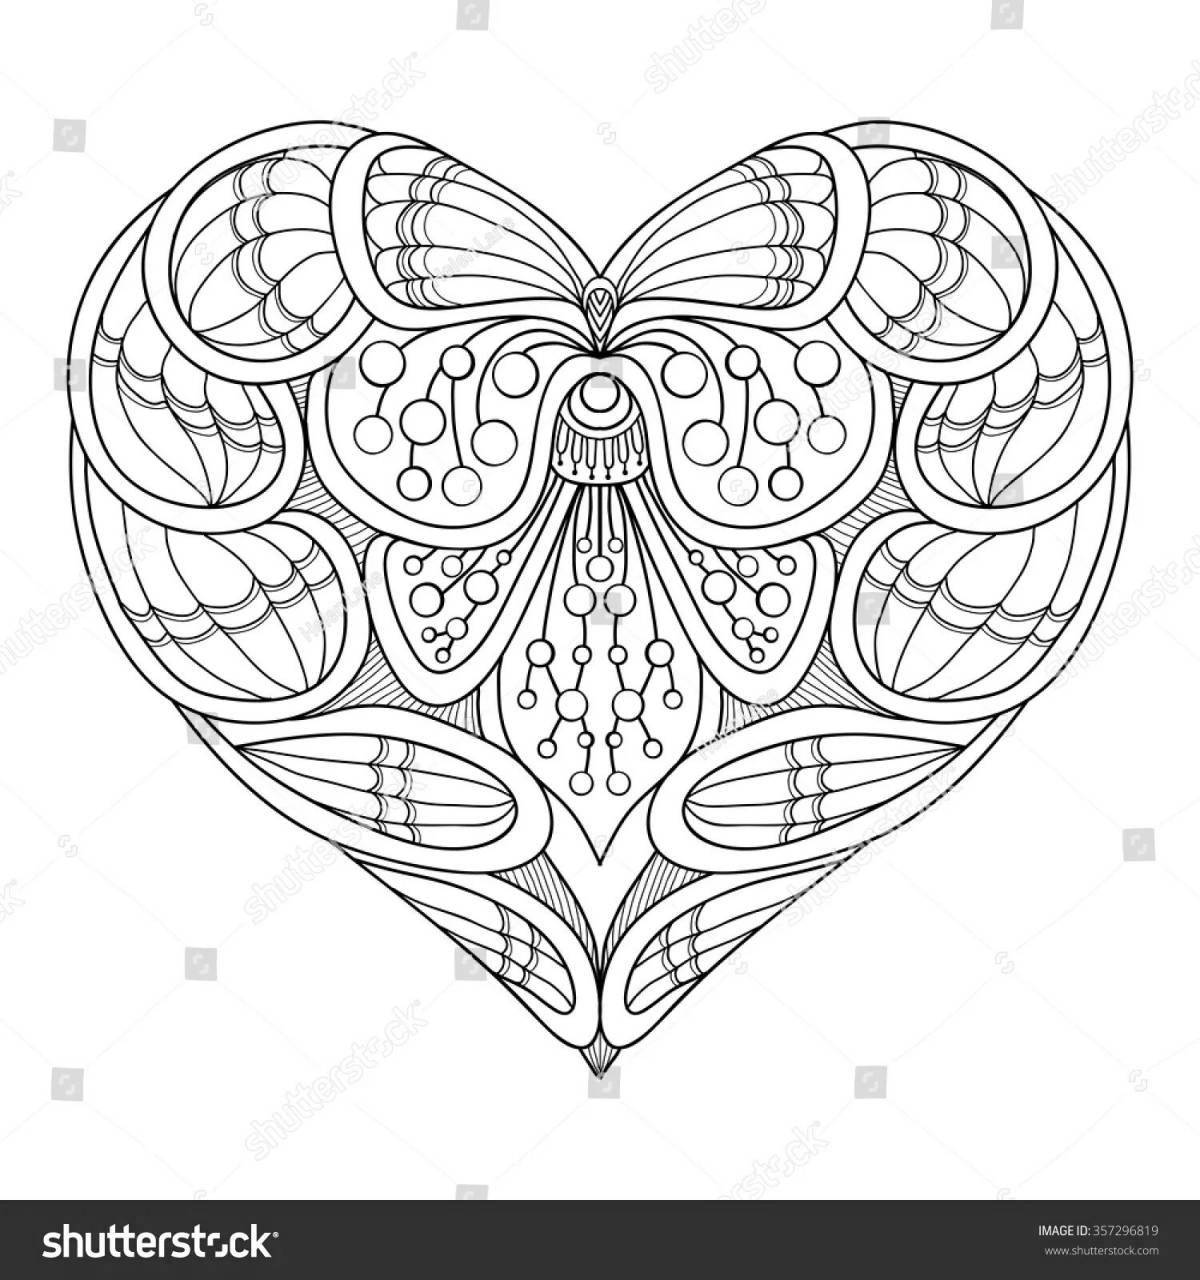 Delightful heart antistress coloring book